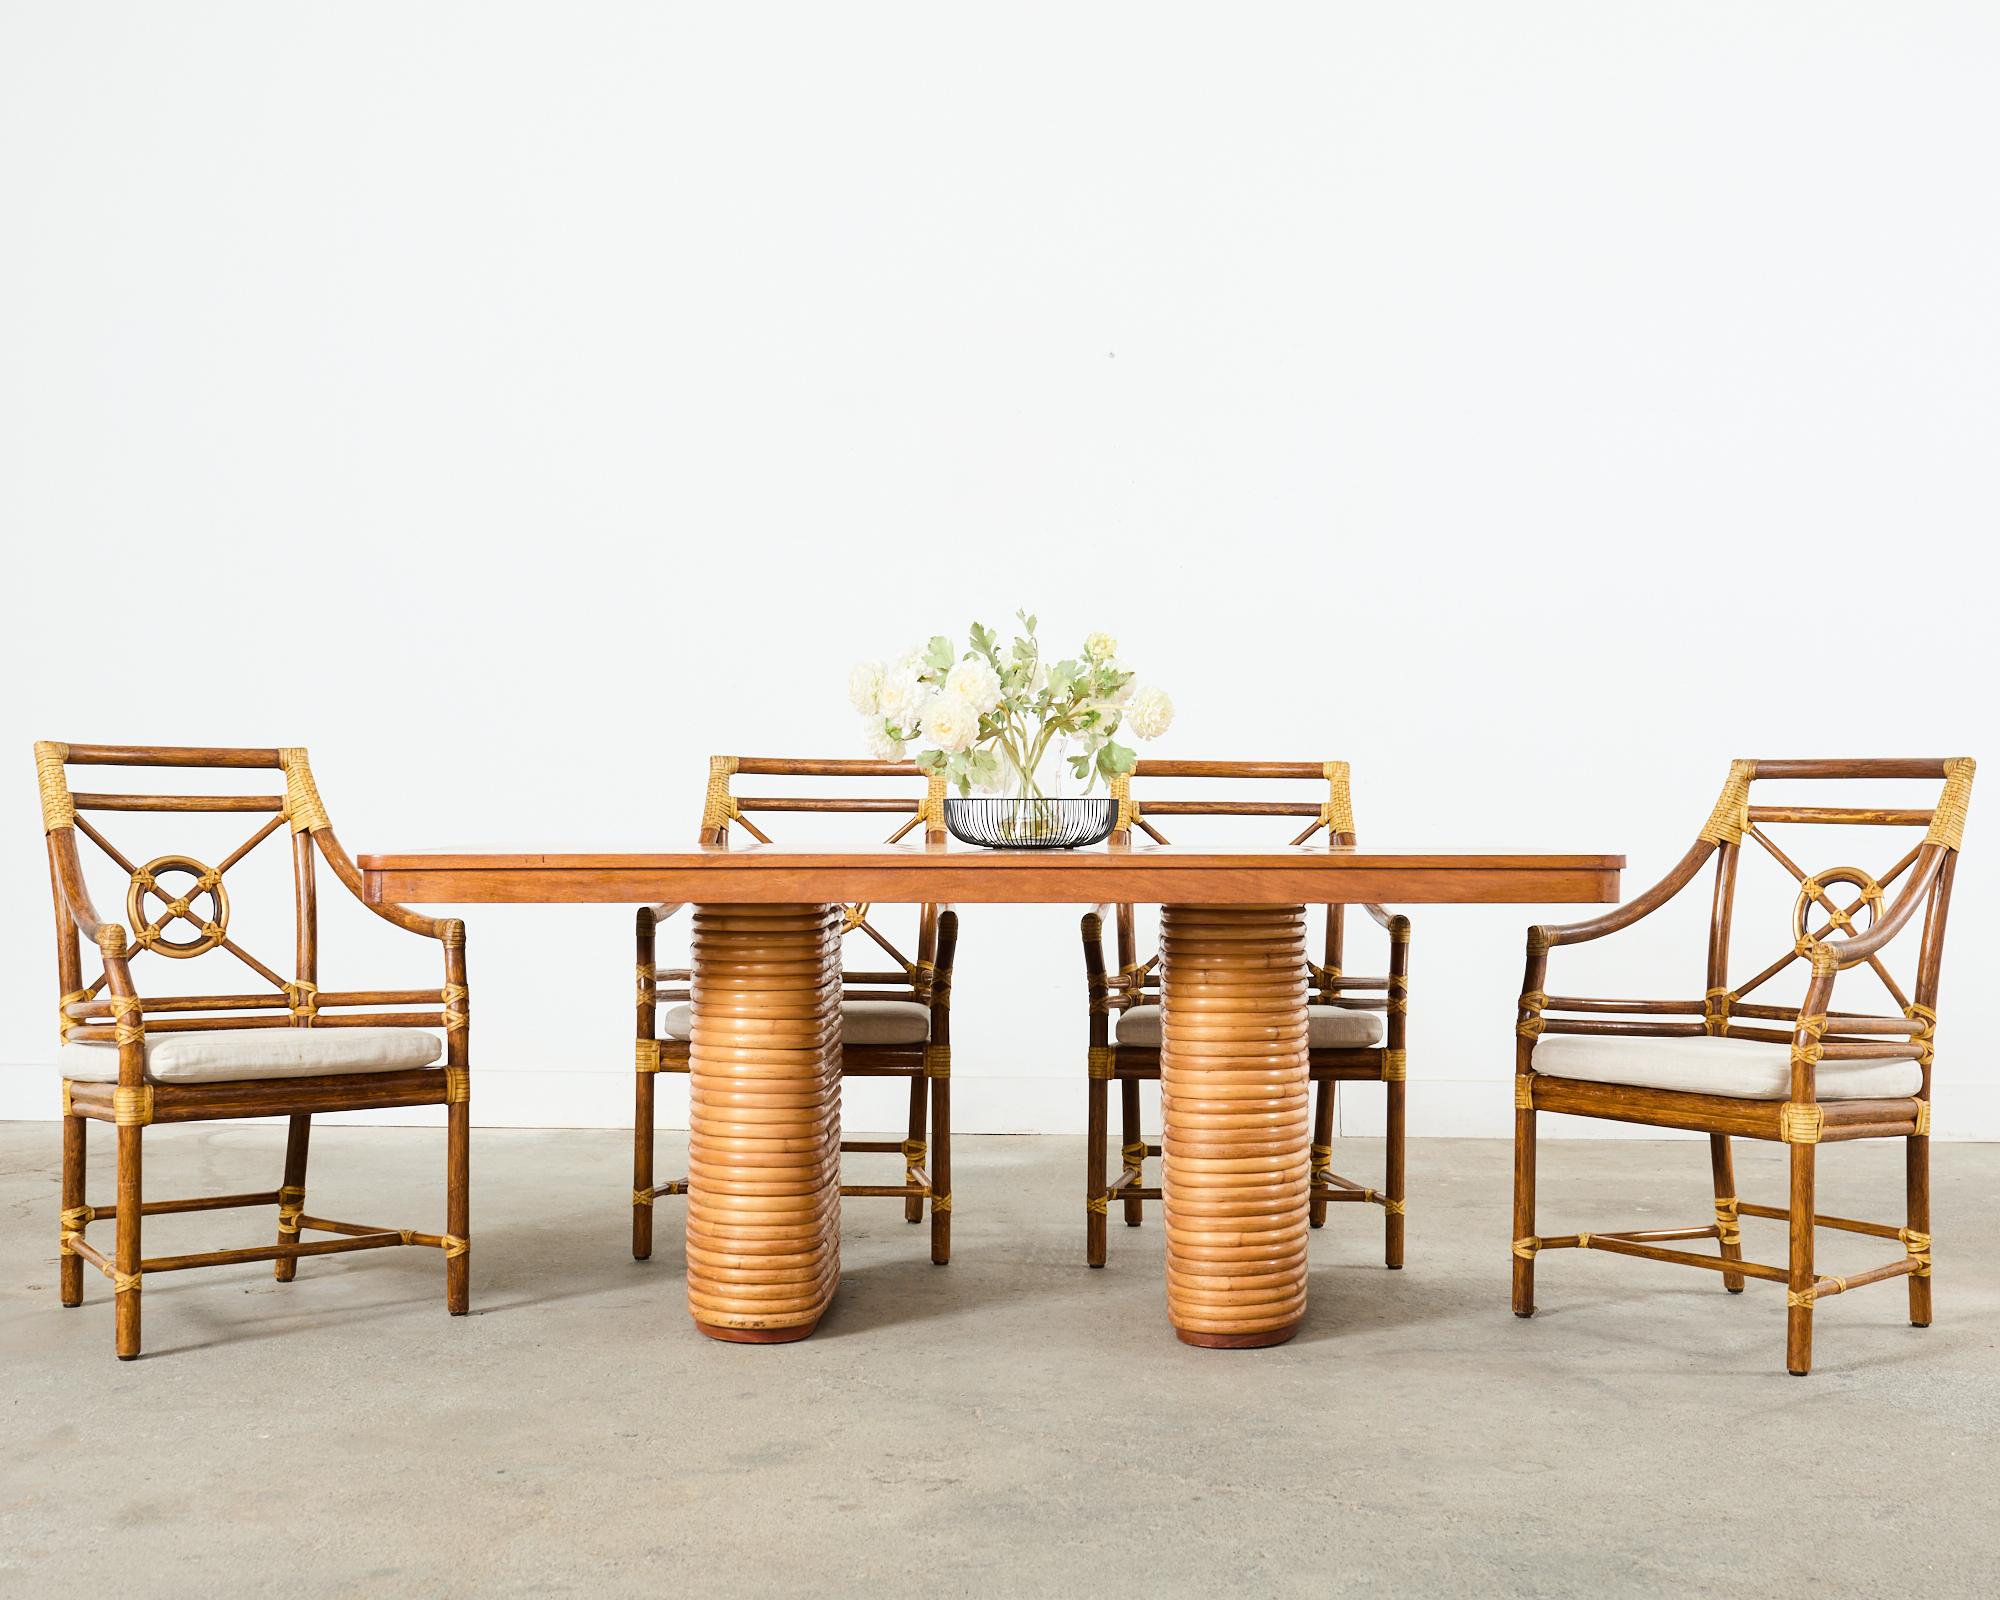 Opulent set of six bespoke rattan target dining chairs made in the California coastal organic modern style by McGuire. The set consists of five target armchairs (Model MCM59) and one matching side chair (Model MCM60) measuring 20 inches wide. The